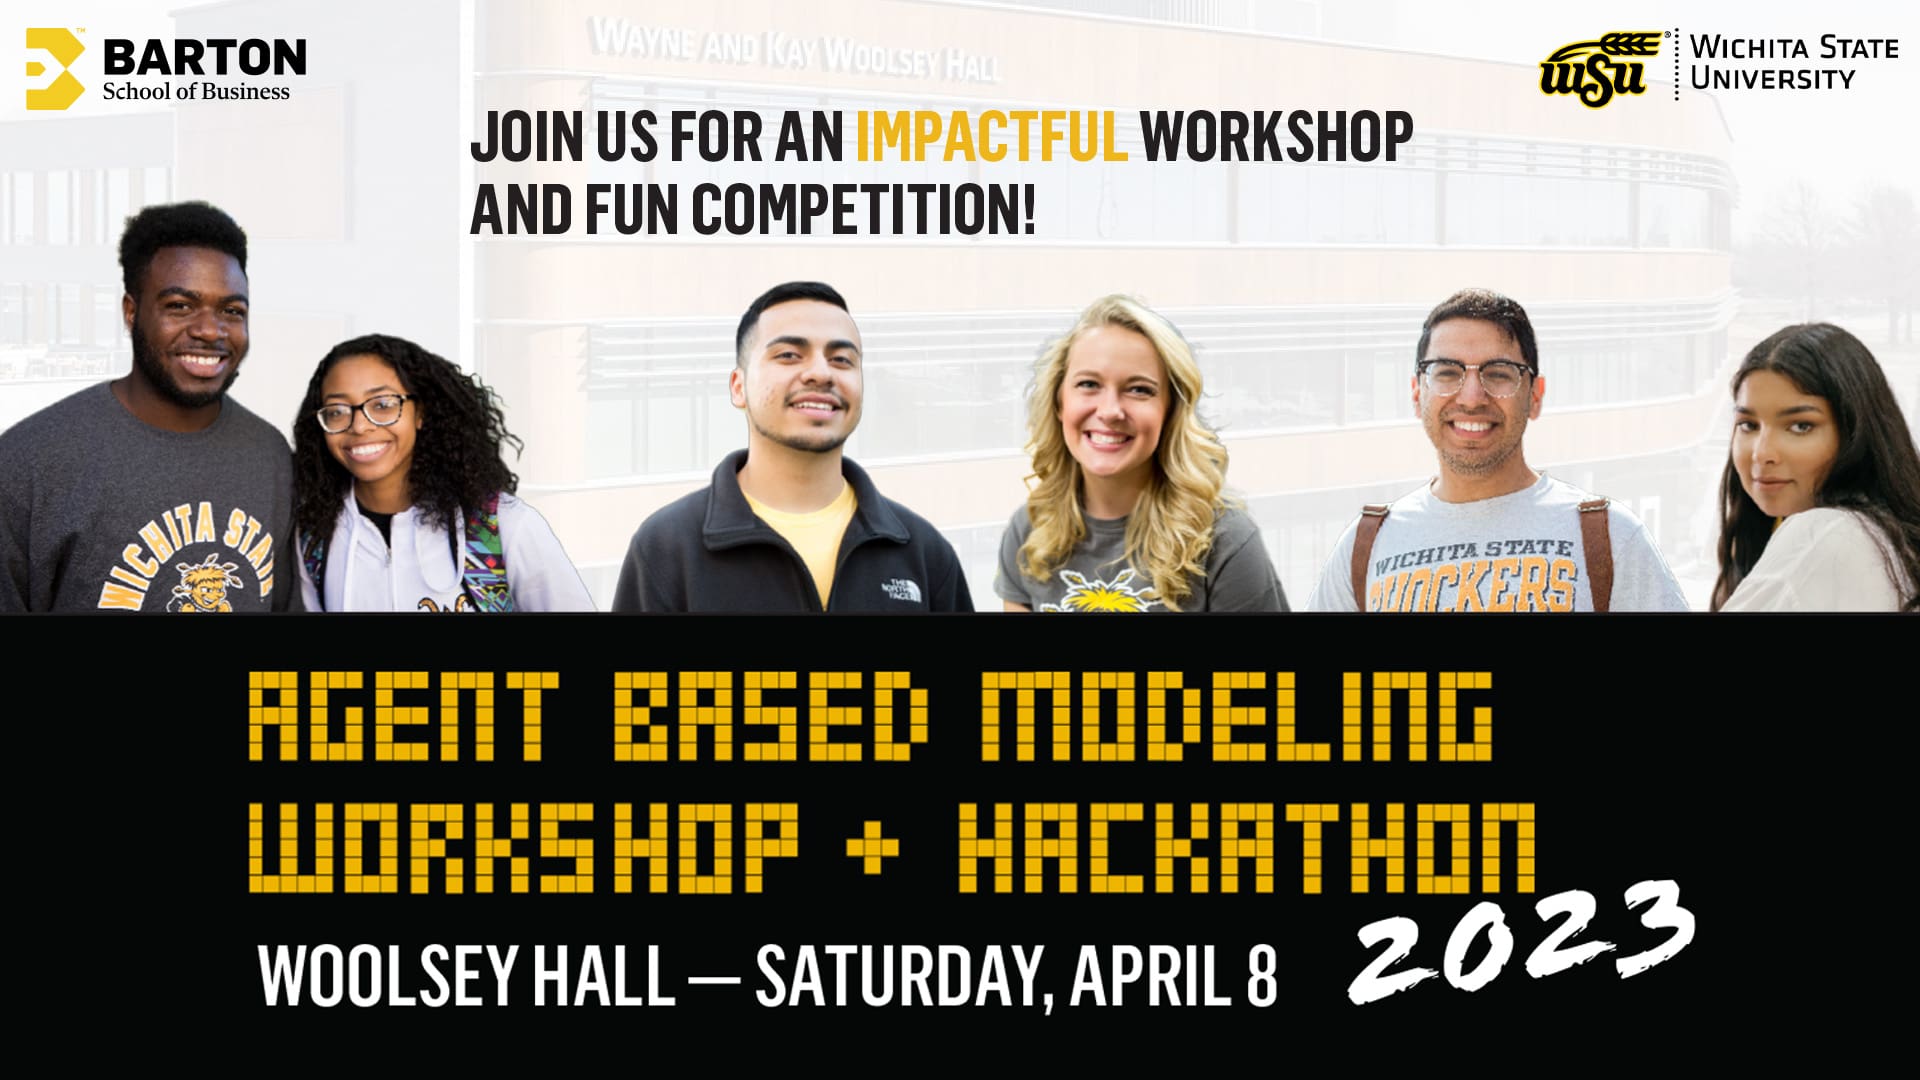 Graphic with photos of students and the text, "Join us for an impactful workshop and fun competition! Agent based modeling workshop + hackathon 2023 | Woolsey Hall - Saturday, April 8.